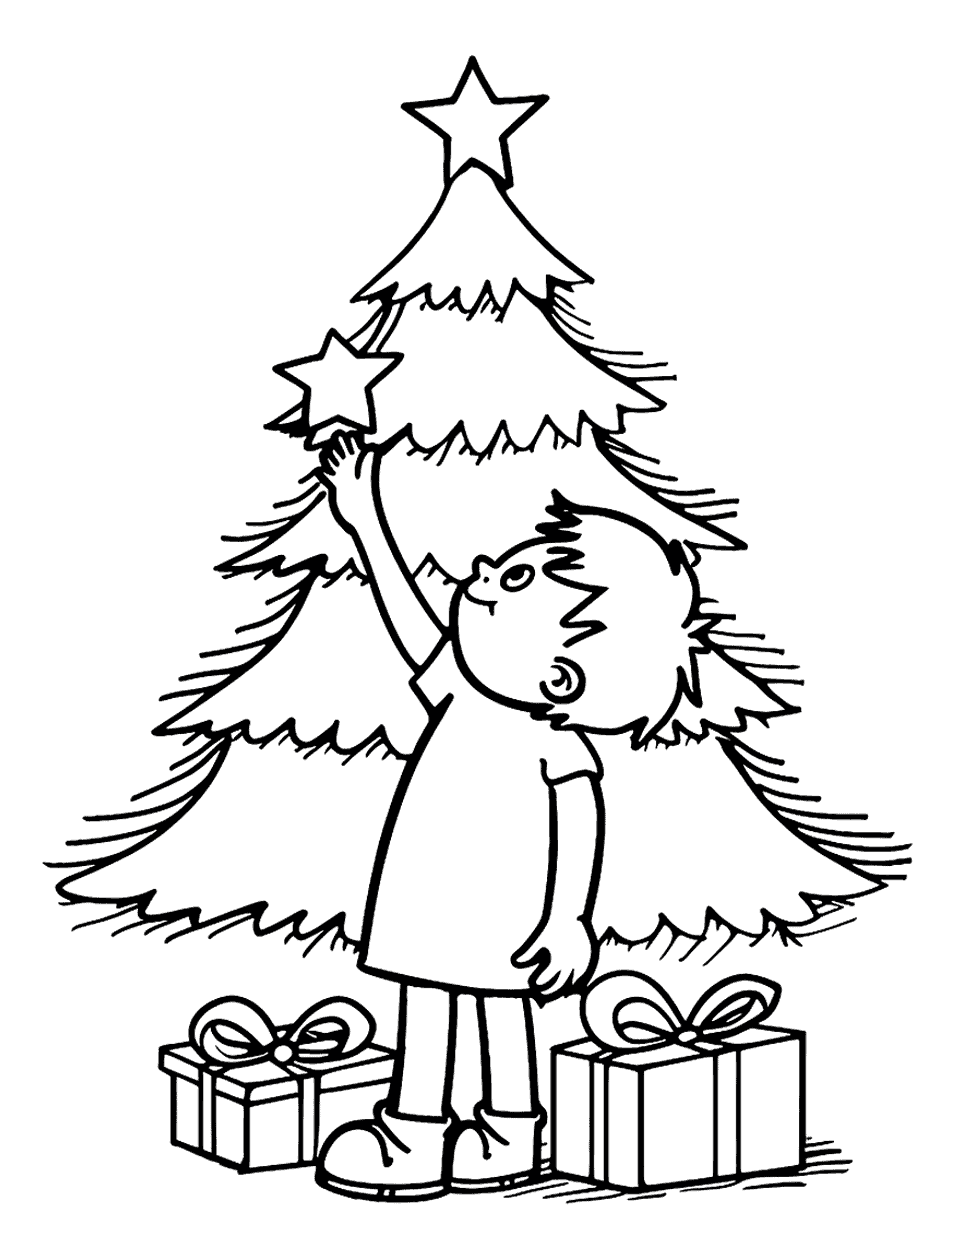 Christmas Tree Decorating Toddler Coloring Page - A child reaches up to put a star on top of a Christmas tree, with presents underneath.